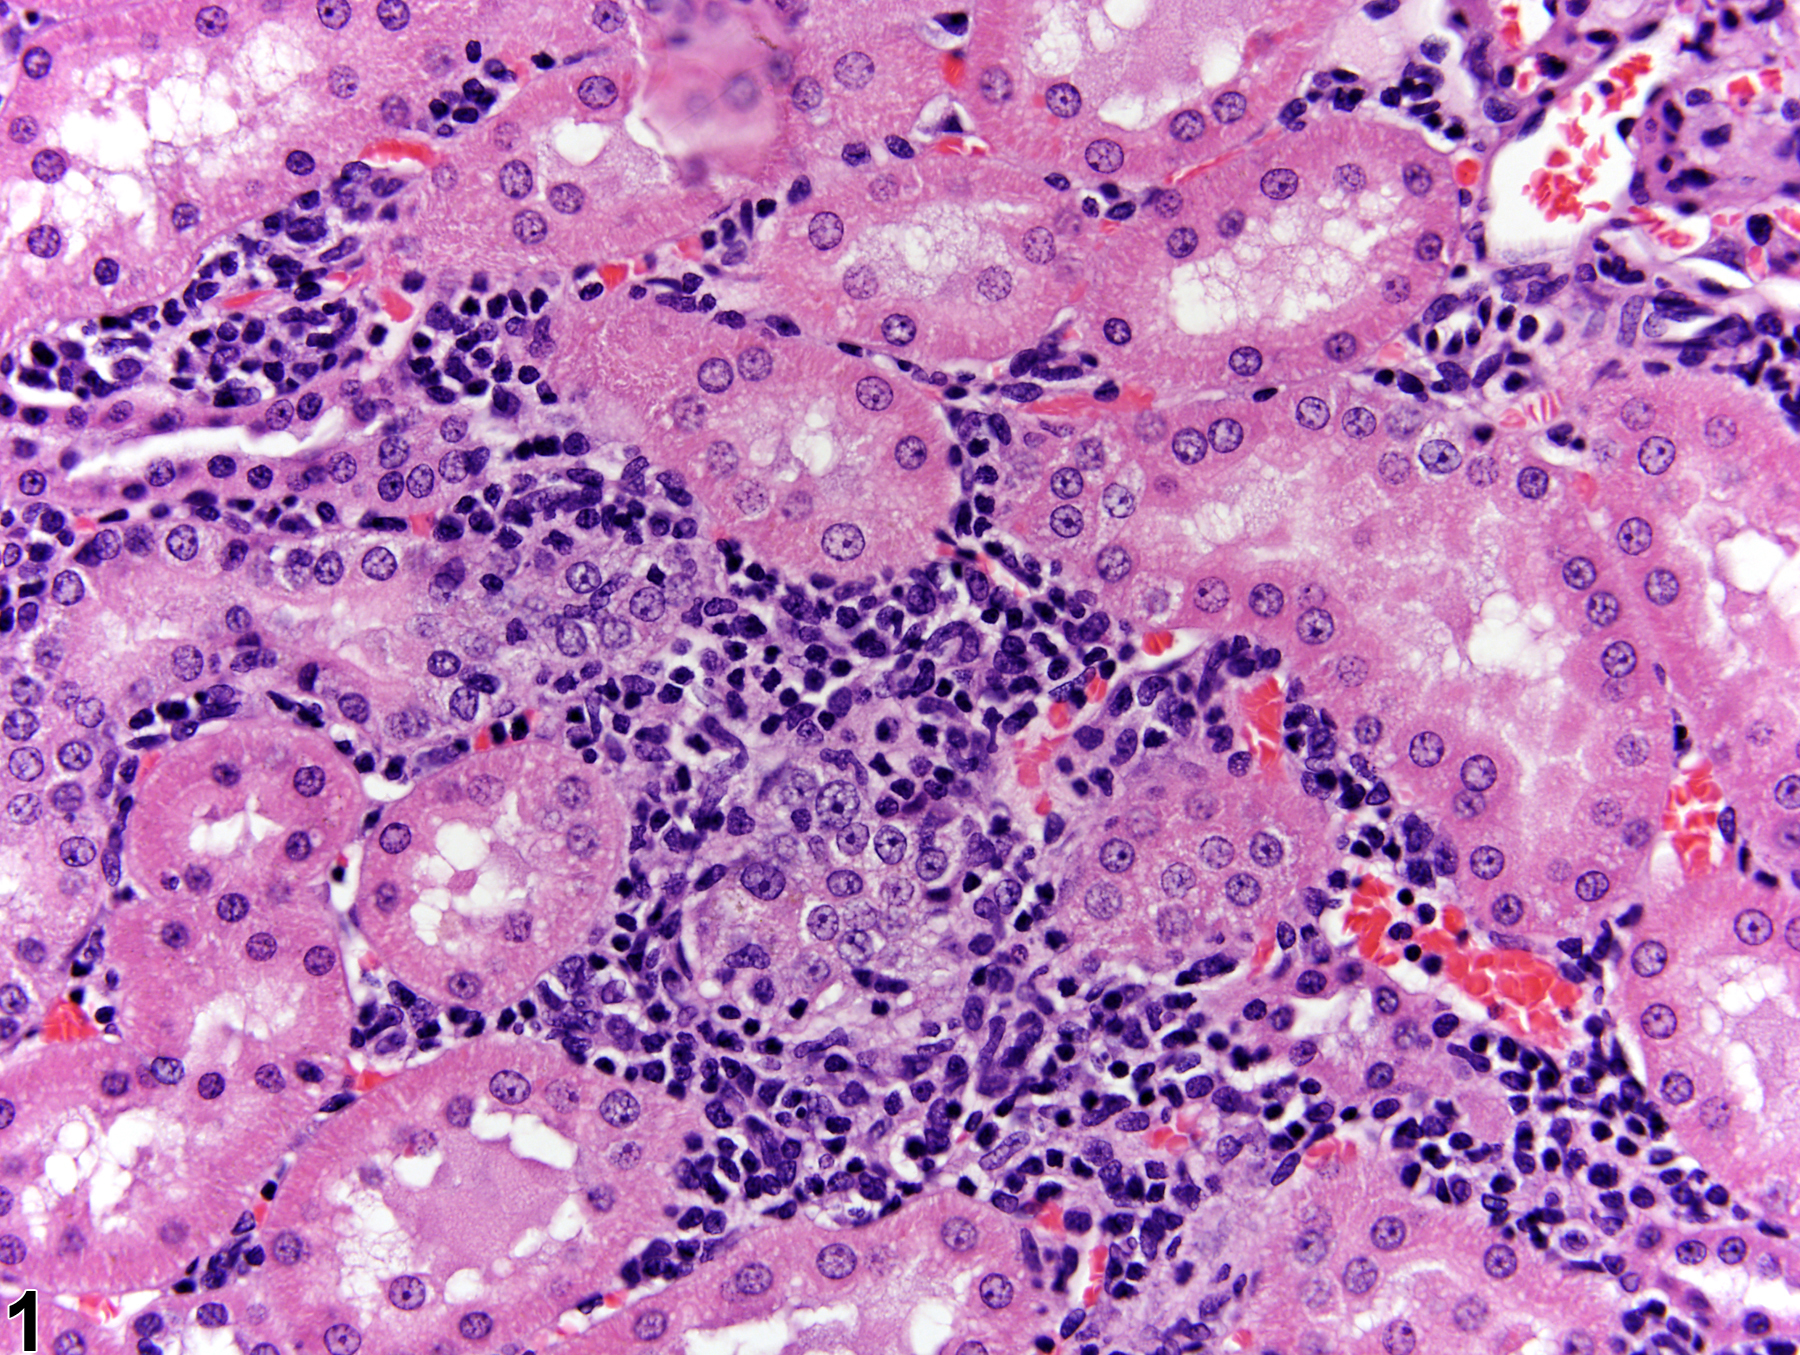 Image of infiltration cellular, lymphocyte in the kidney from a  rat